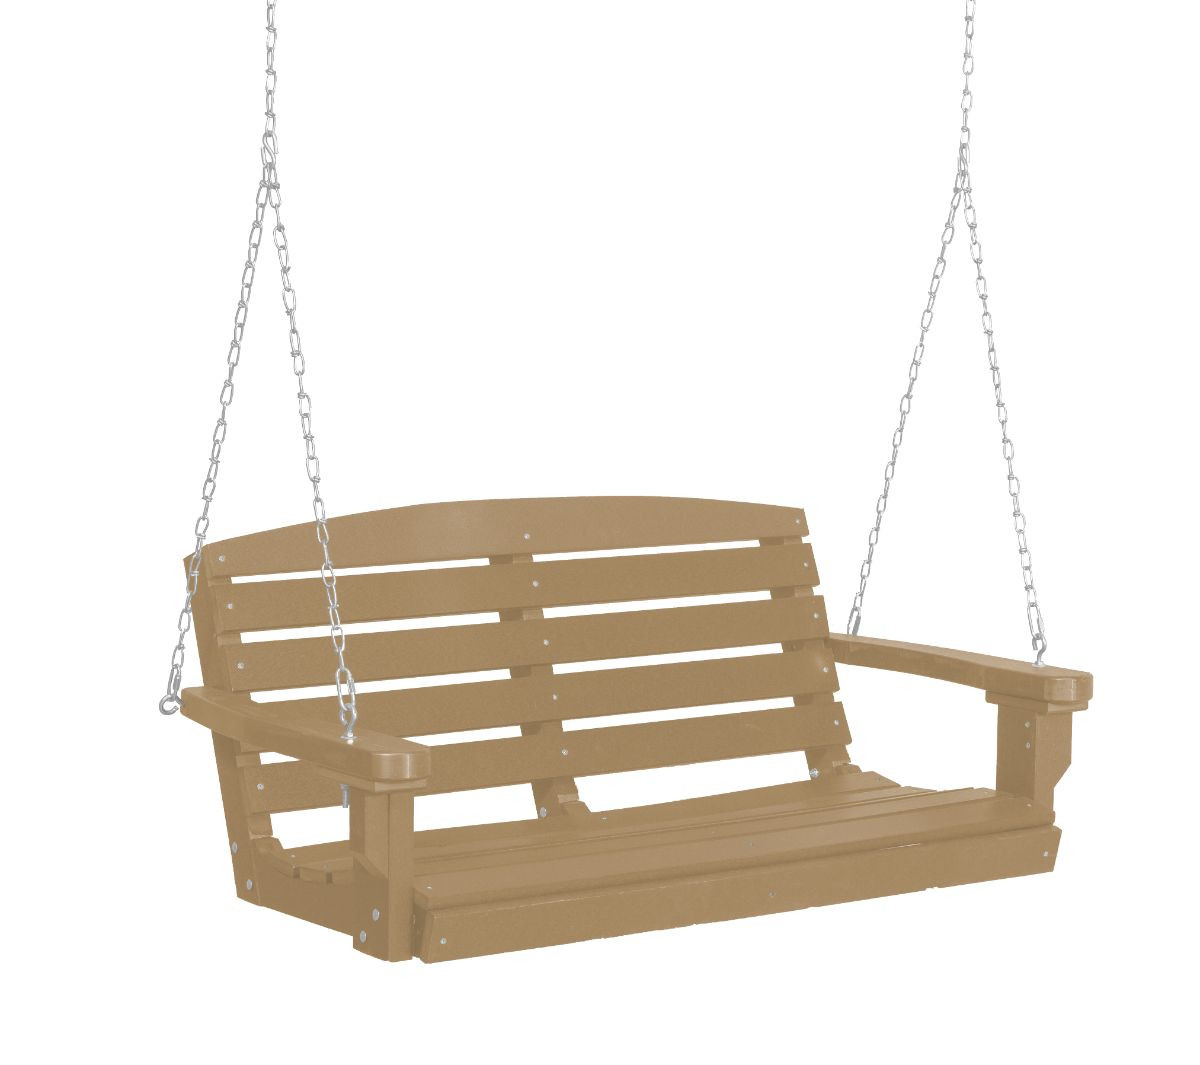 Weathered Wood Green Bay Porch Swing